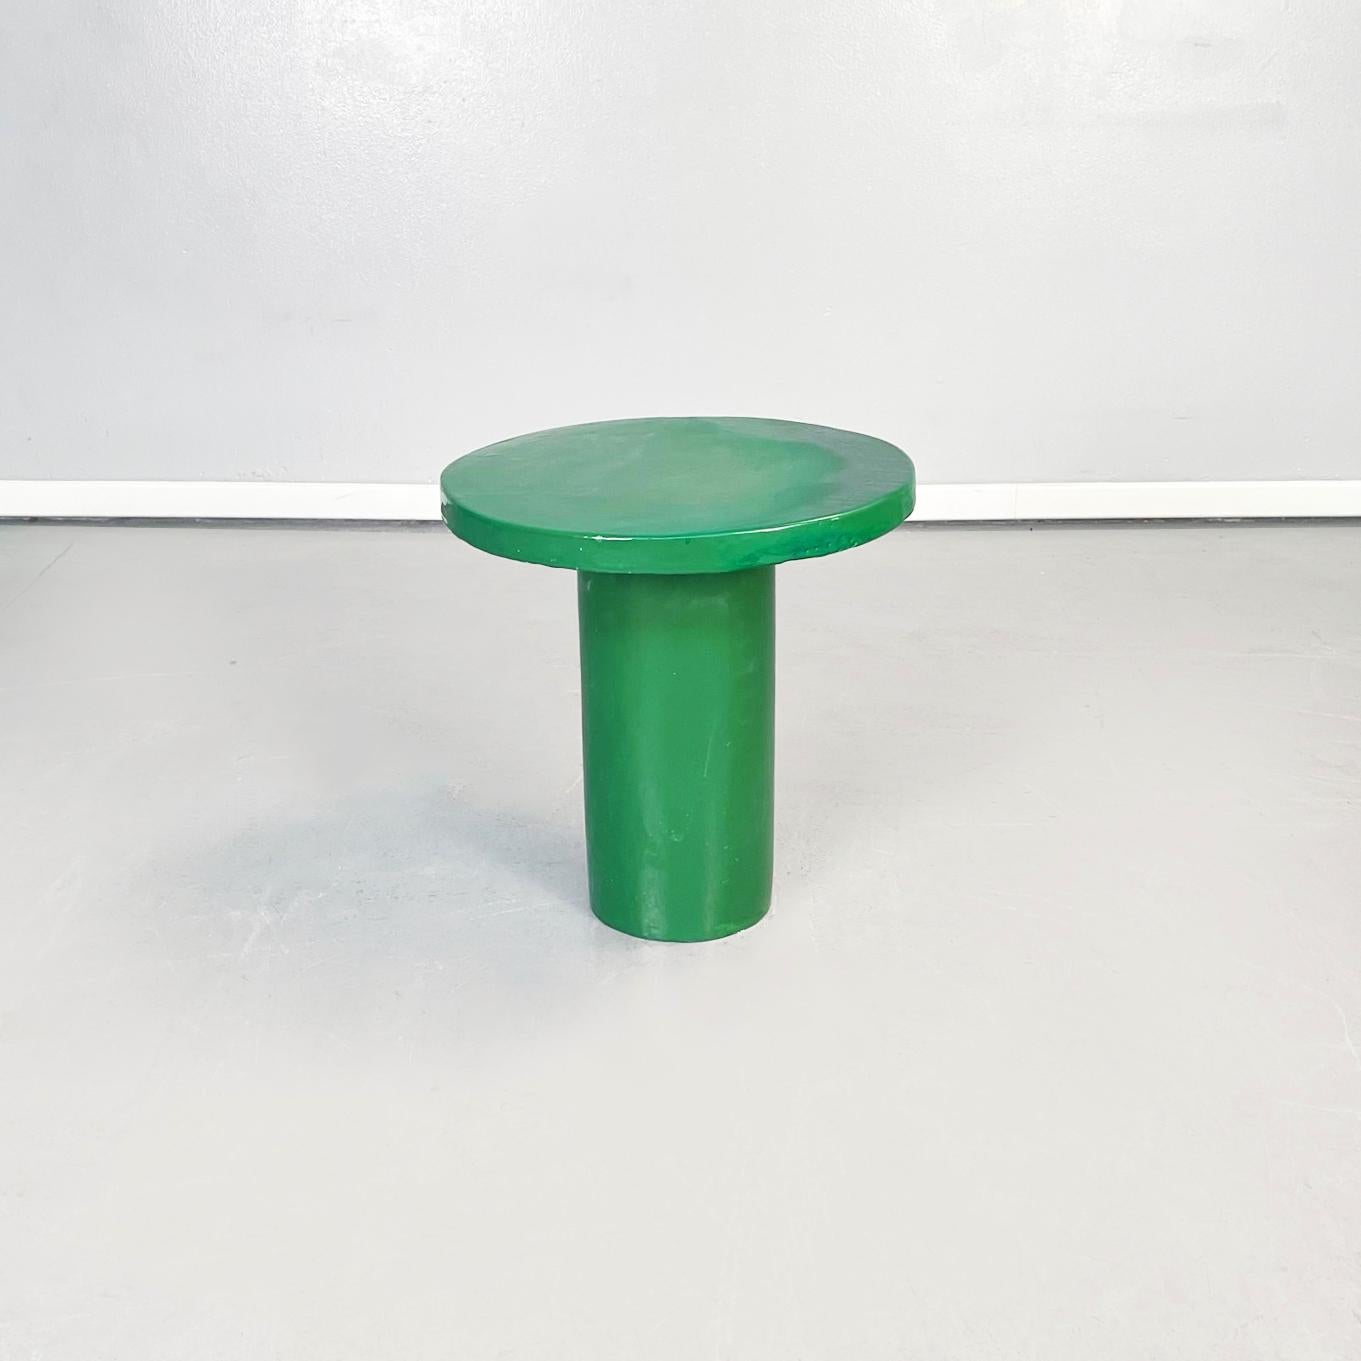 Italian post-modern Decorative round tables in green glazed ceramic, 2000s
Pair of decorative tables with round top in green glazed ceramic. The base is composed of a cylindrical structure. Can be used as coffee tables or side tables.
They come